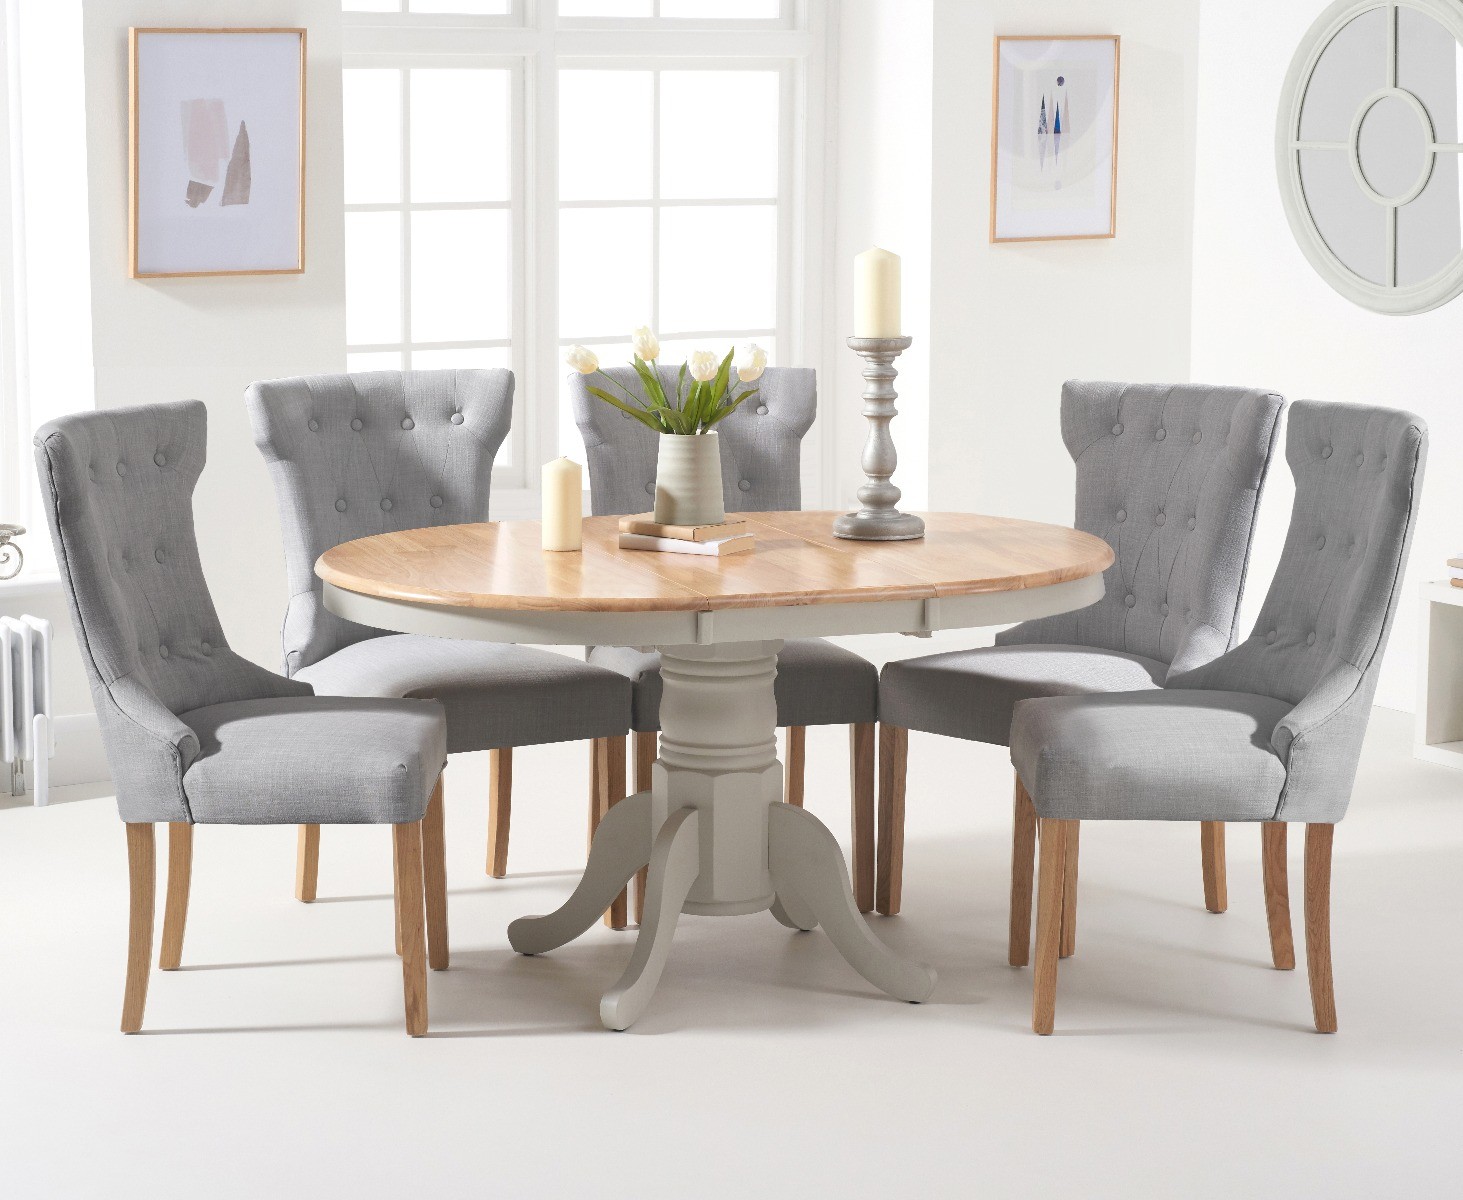 Epsom Oak And Grey Painted Pedestal Extending Table With 4 Grey Clara Chairs